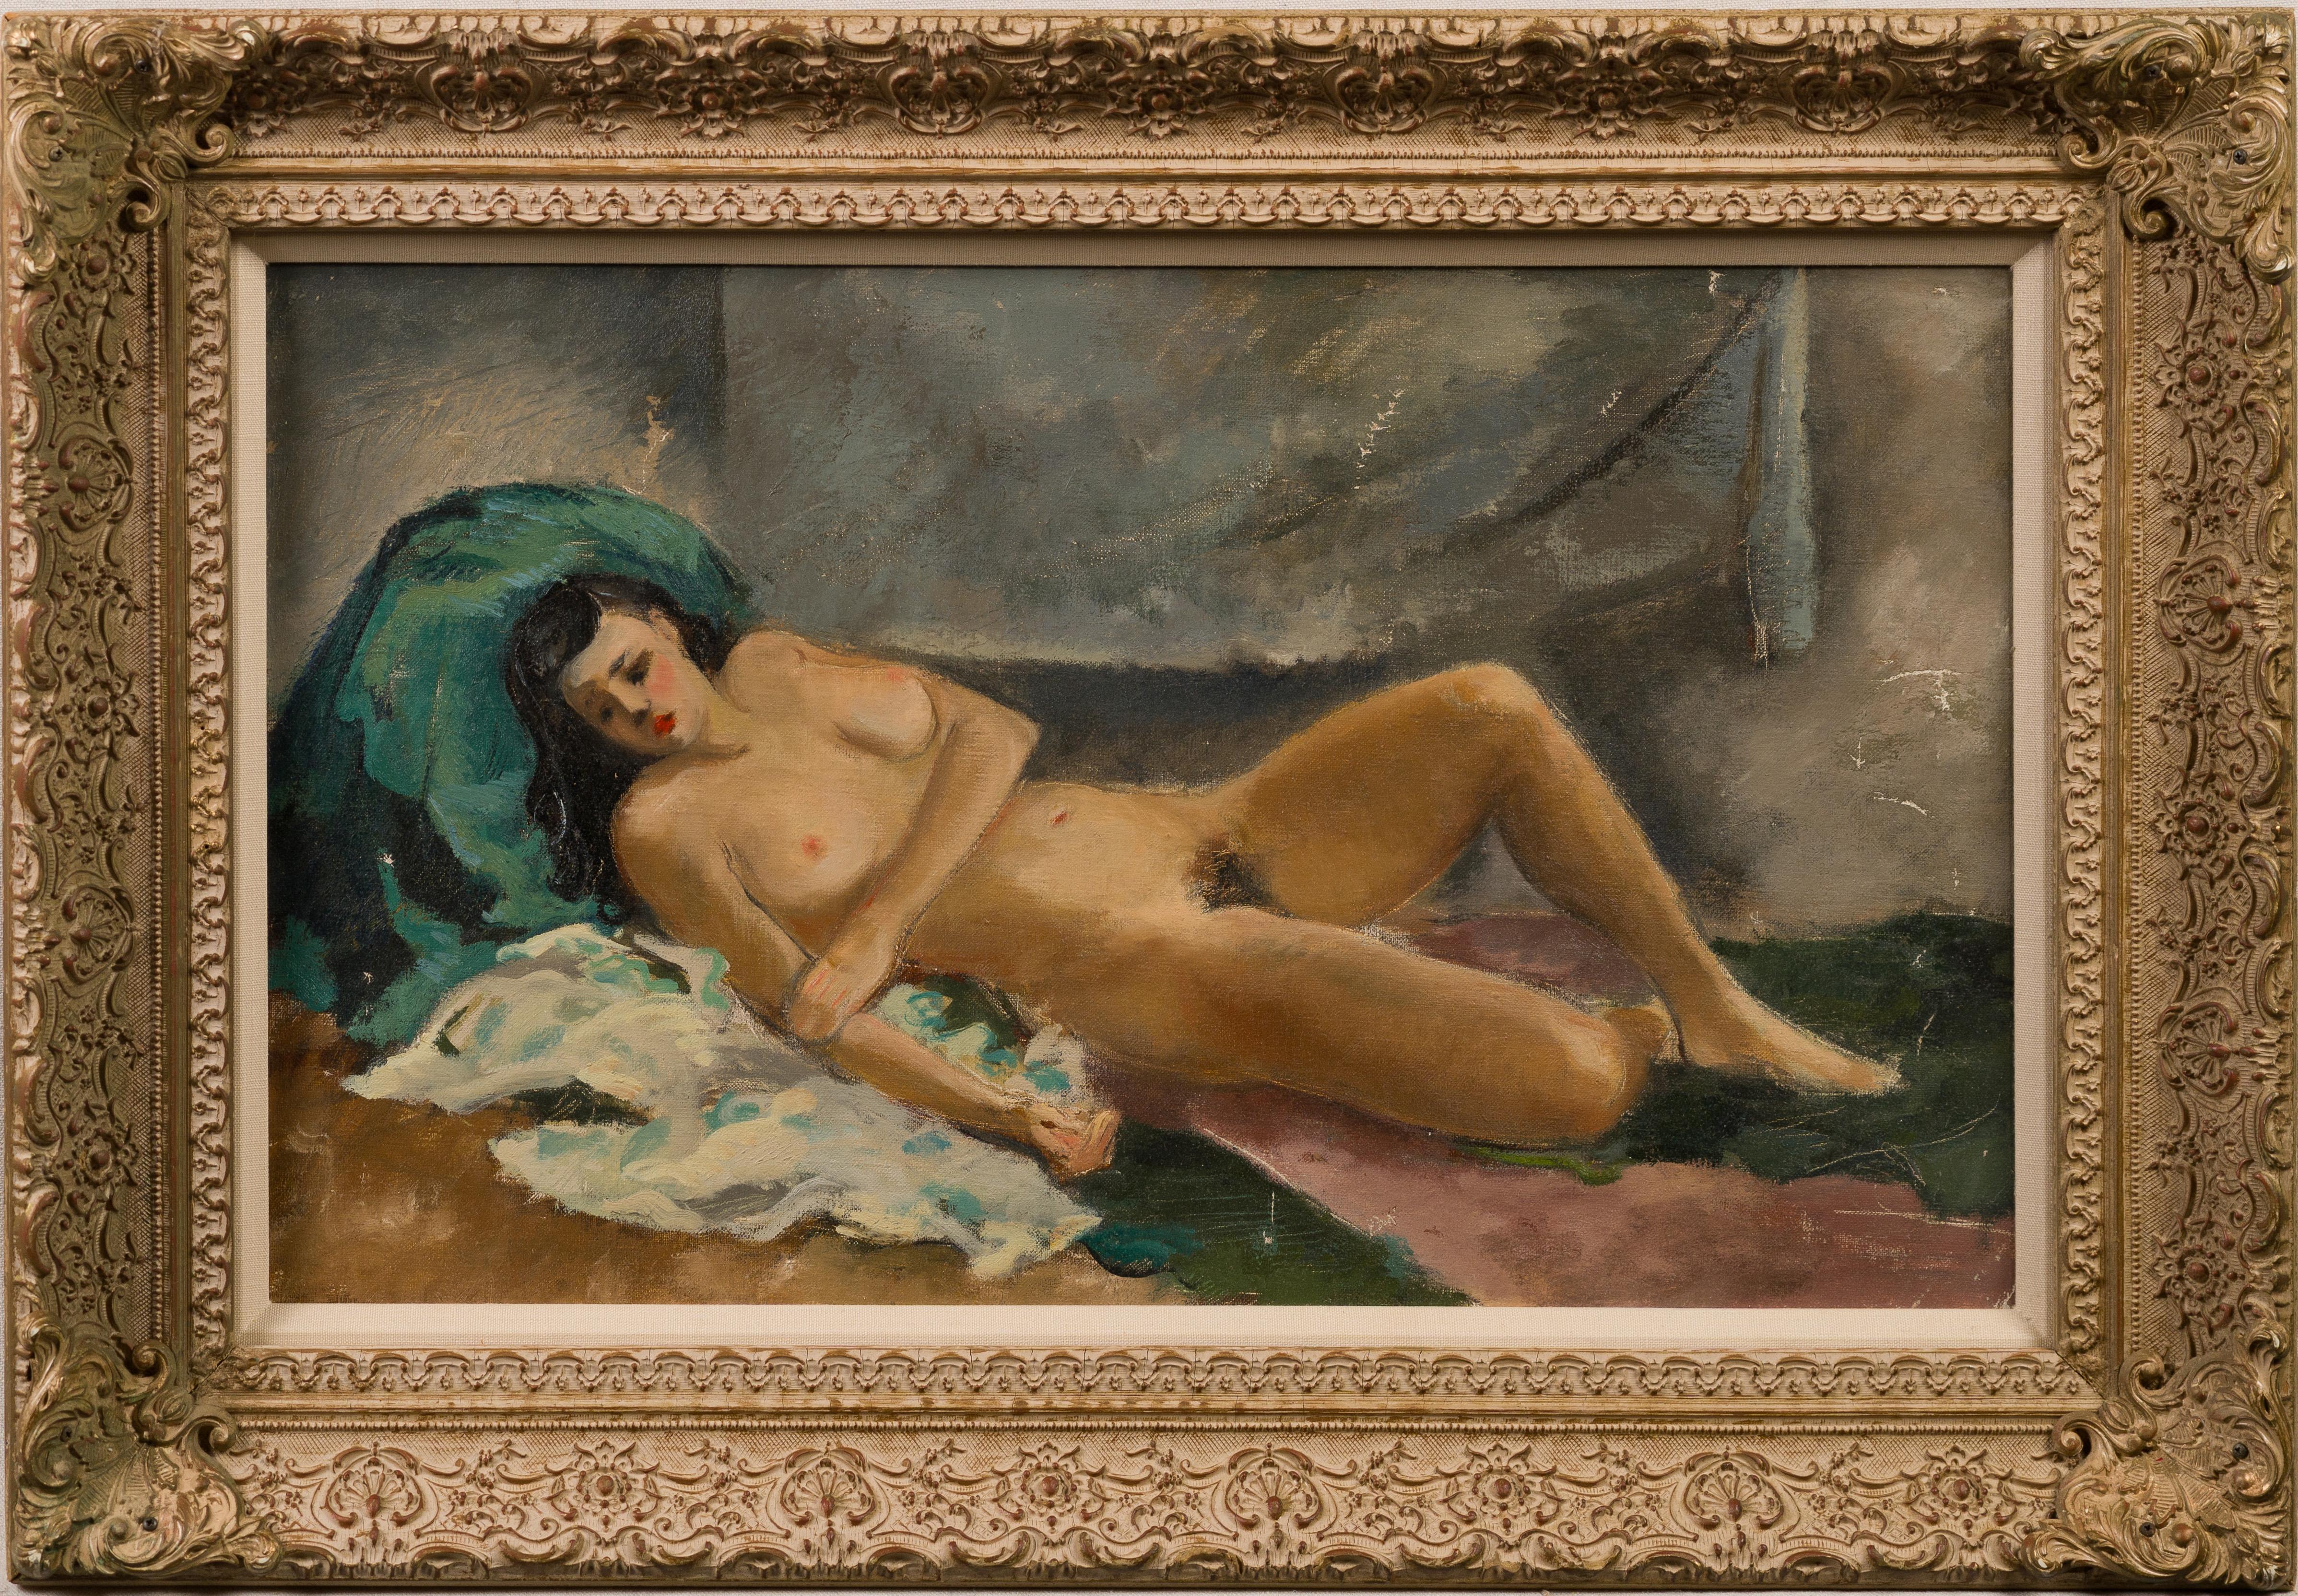 Antique American interior nude portrait oil painting.  Oil on canvas.  Framed.  Signed on verso.  